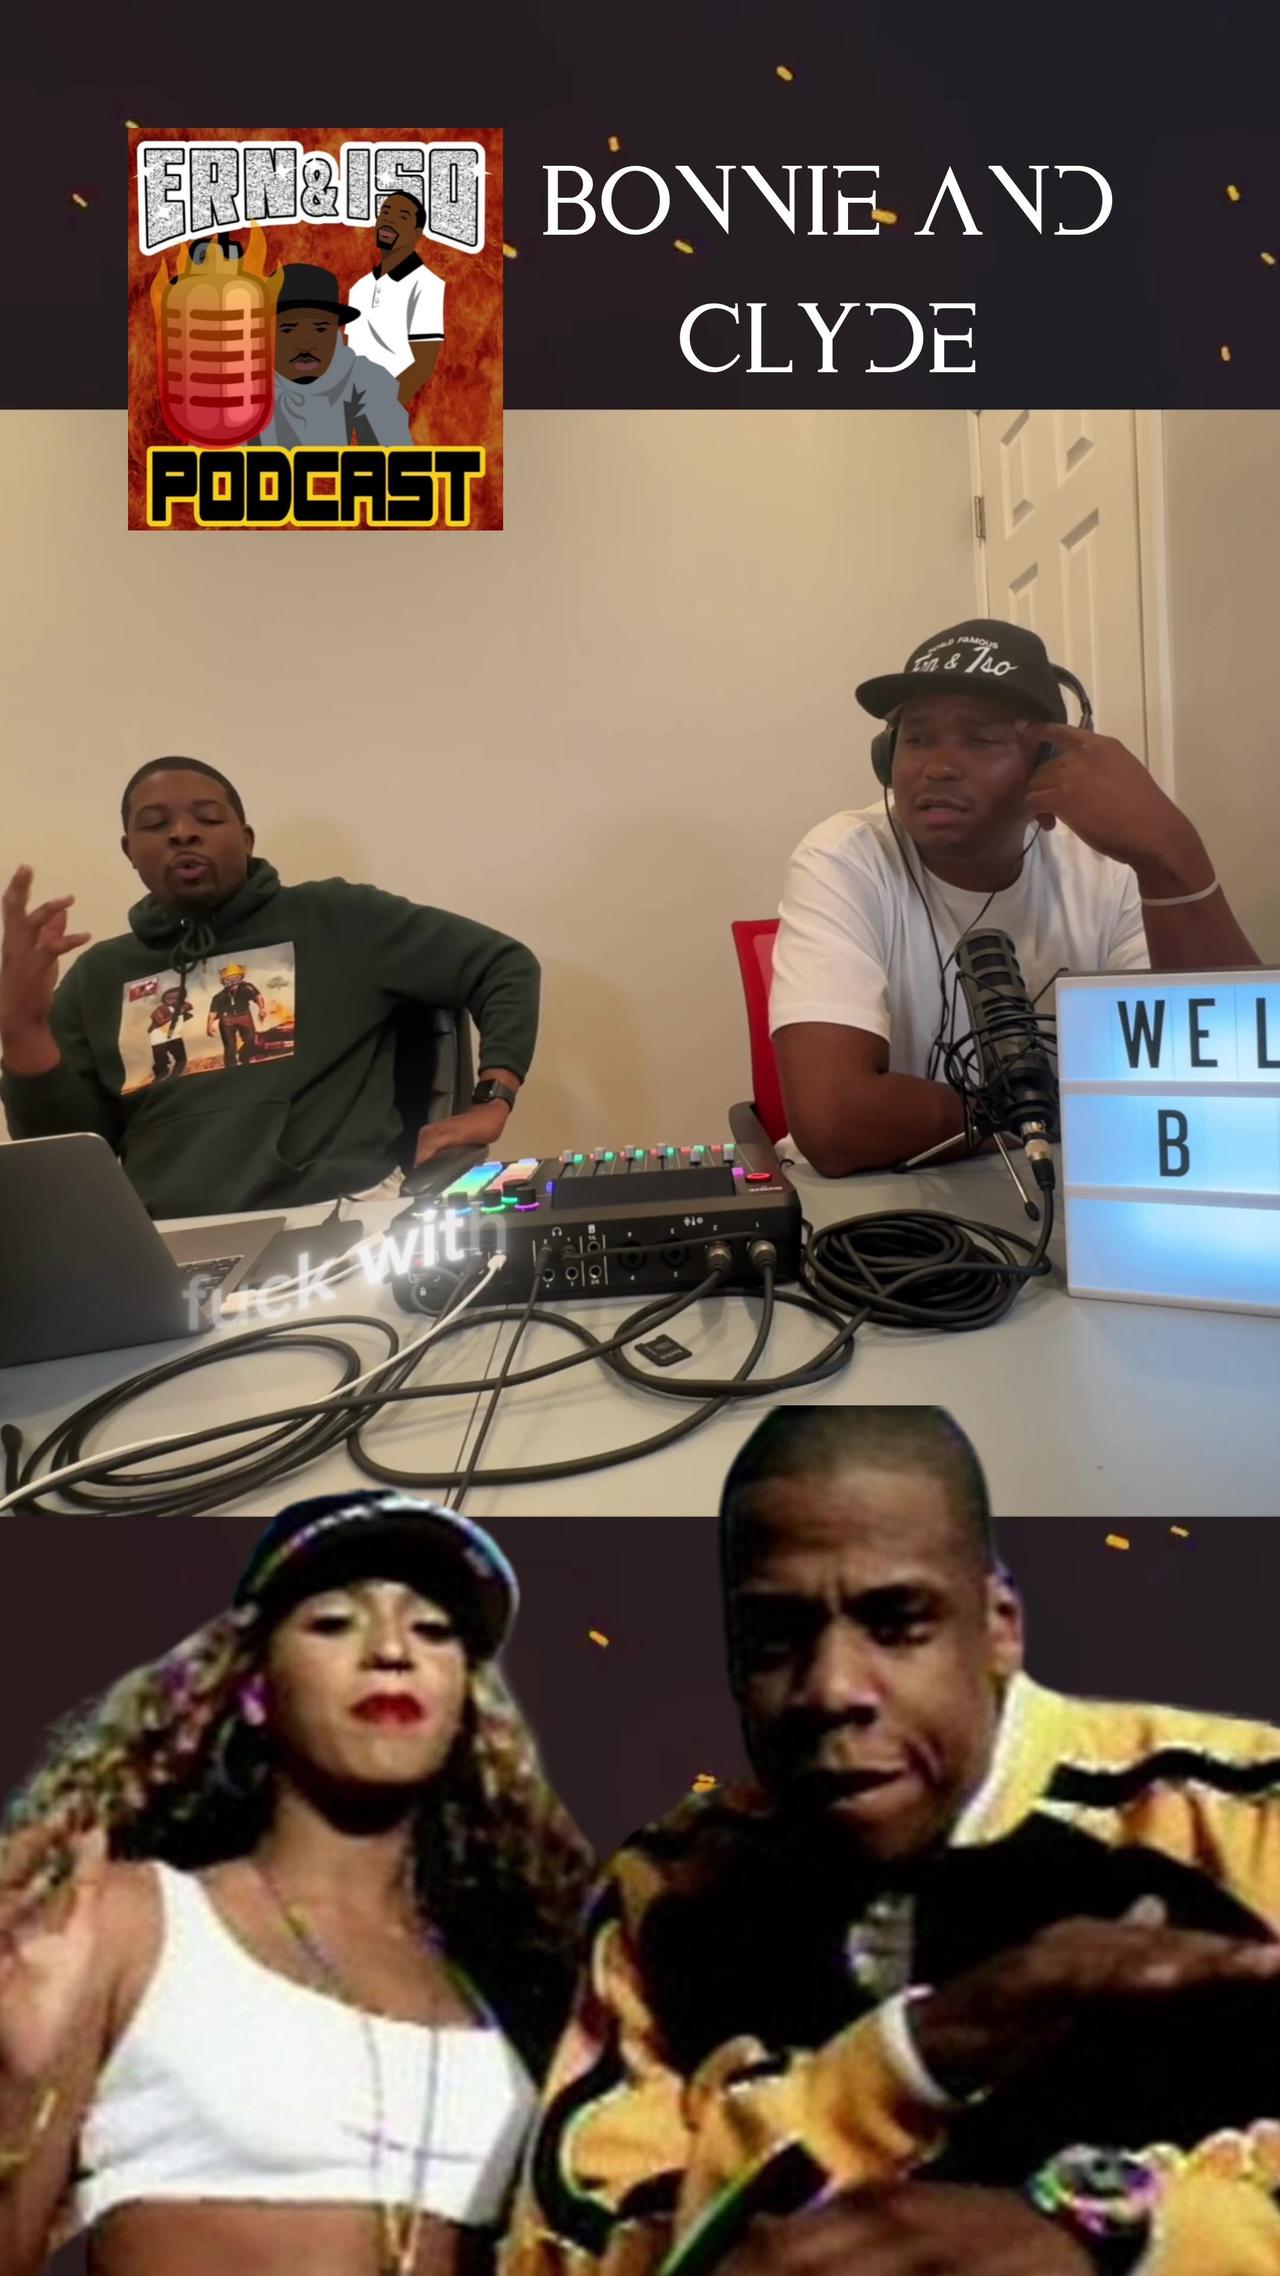 🎙️ Ern and Iso Podcast: Music Debates - Jay-Z & Beyoncé's "Bonnie and Clyde" Remake Controversy! 😱�